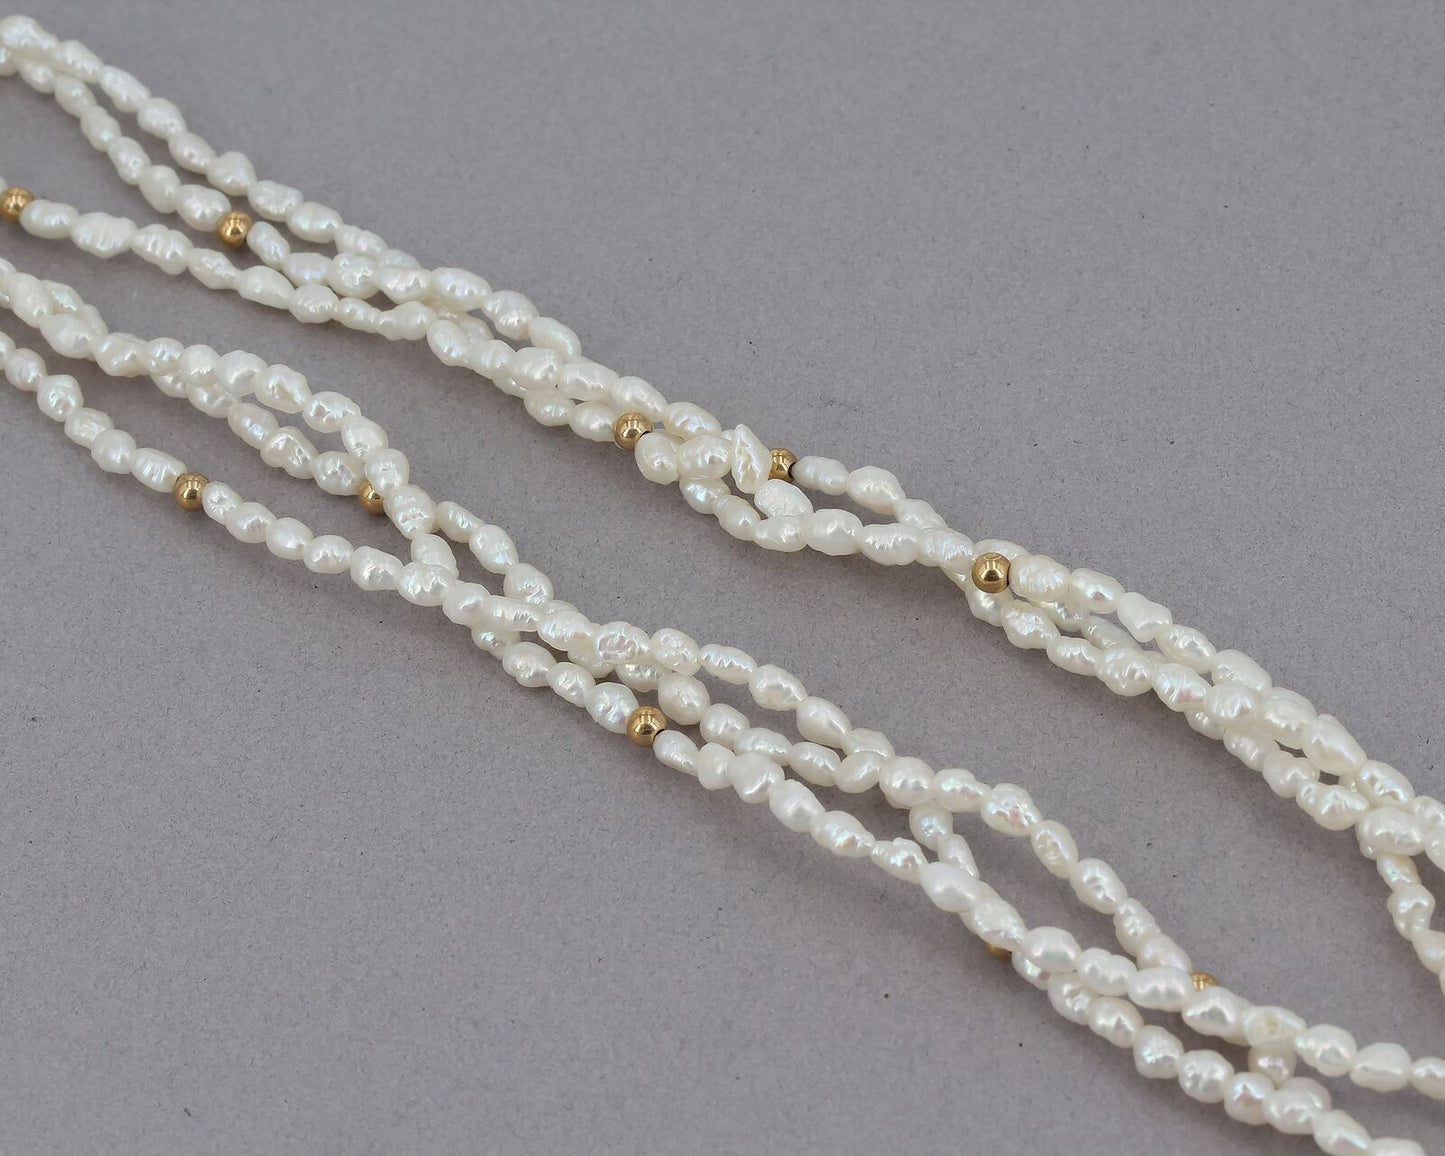 Vintage 24" Long 3 Strand "Rice Krispie" Pearl Necklace 14K Gold Spacers & Clasp